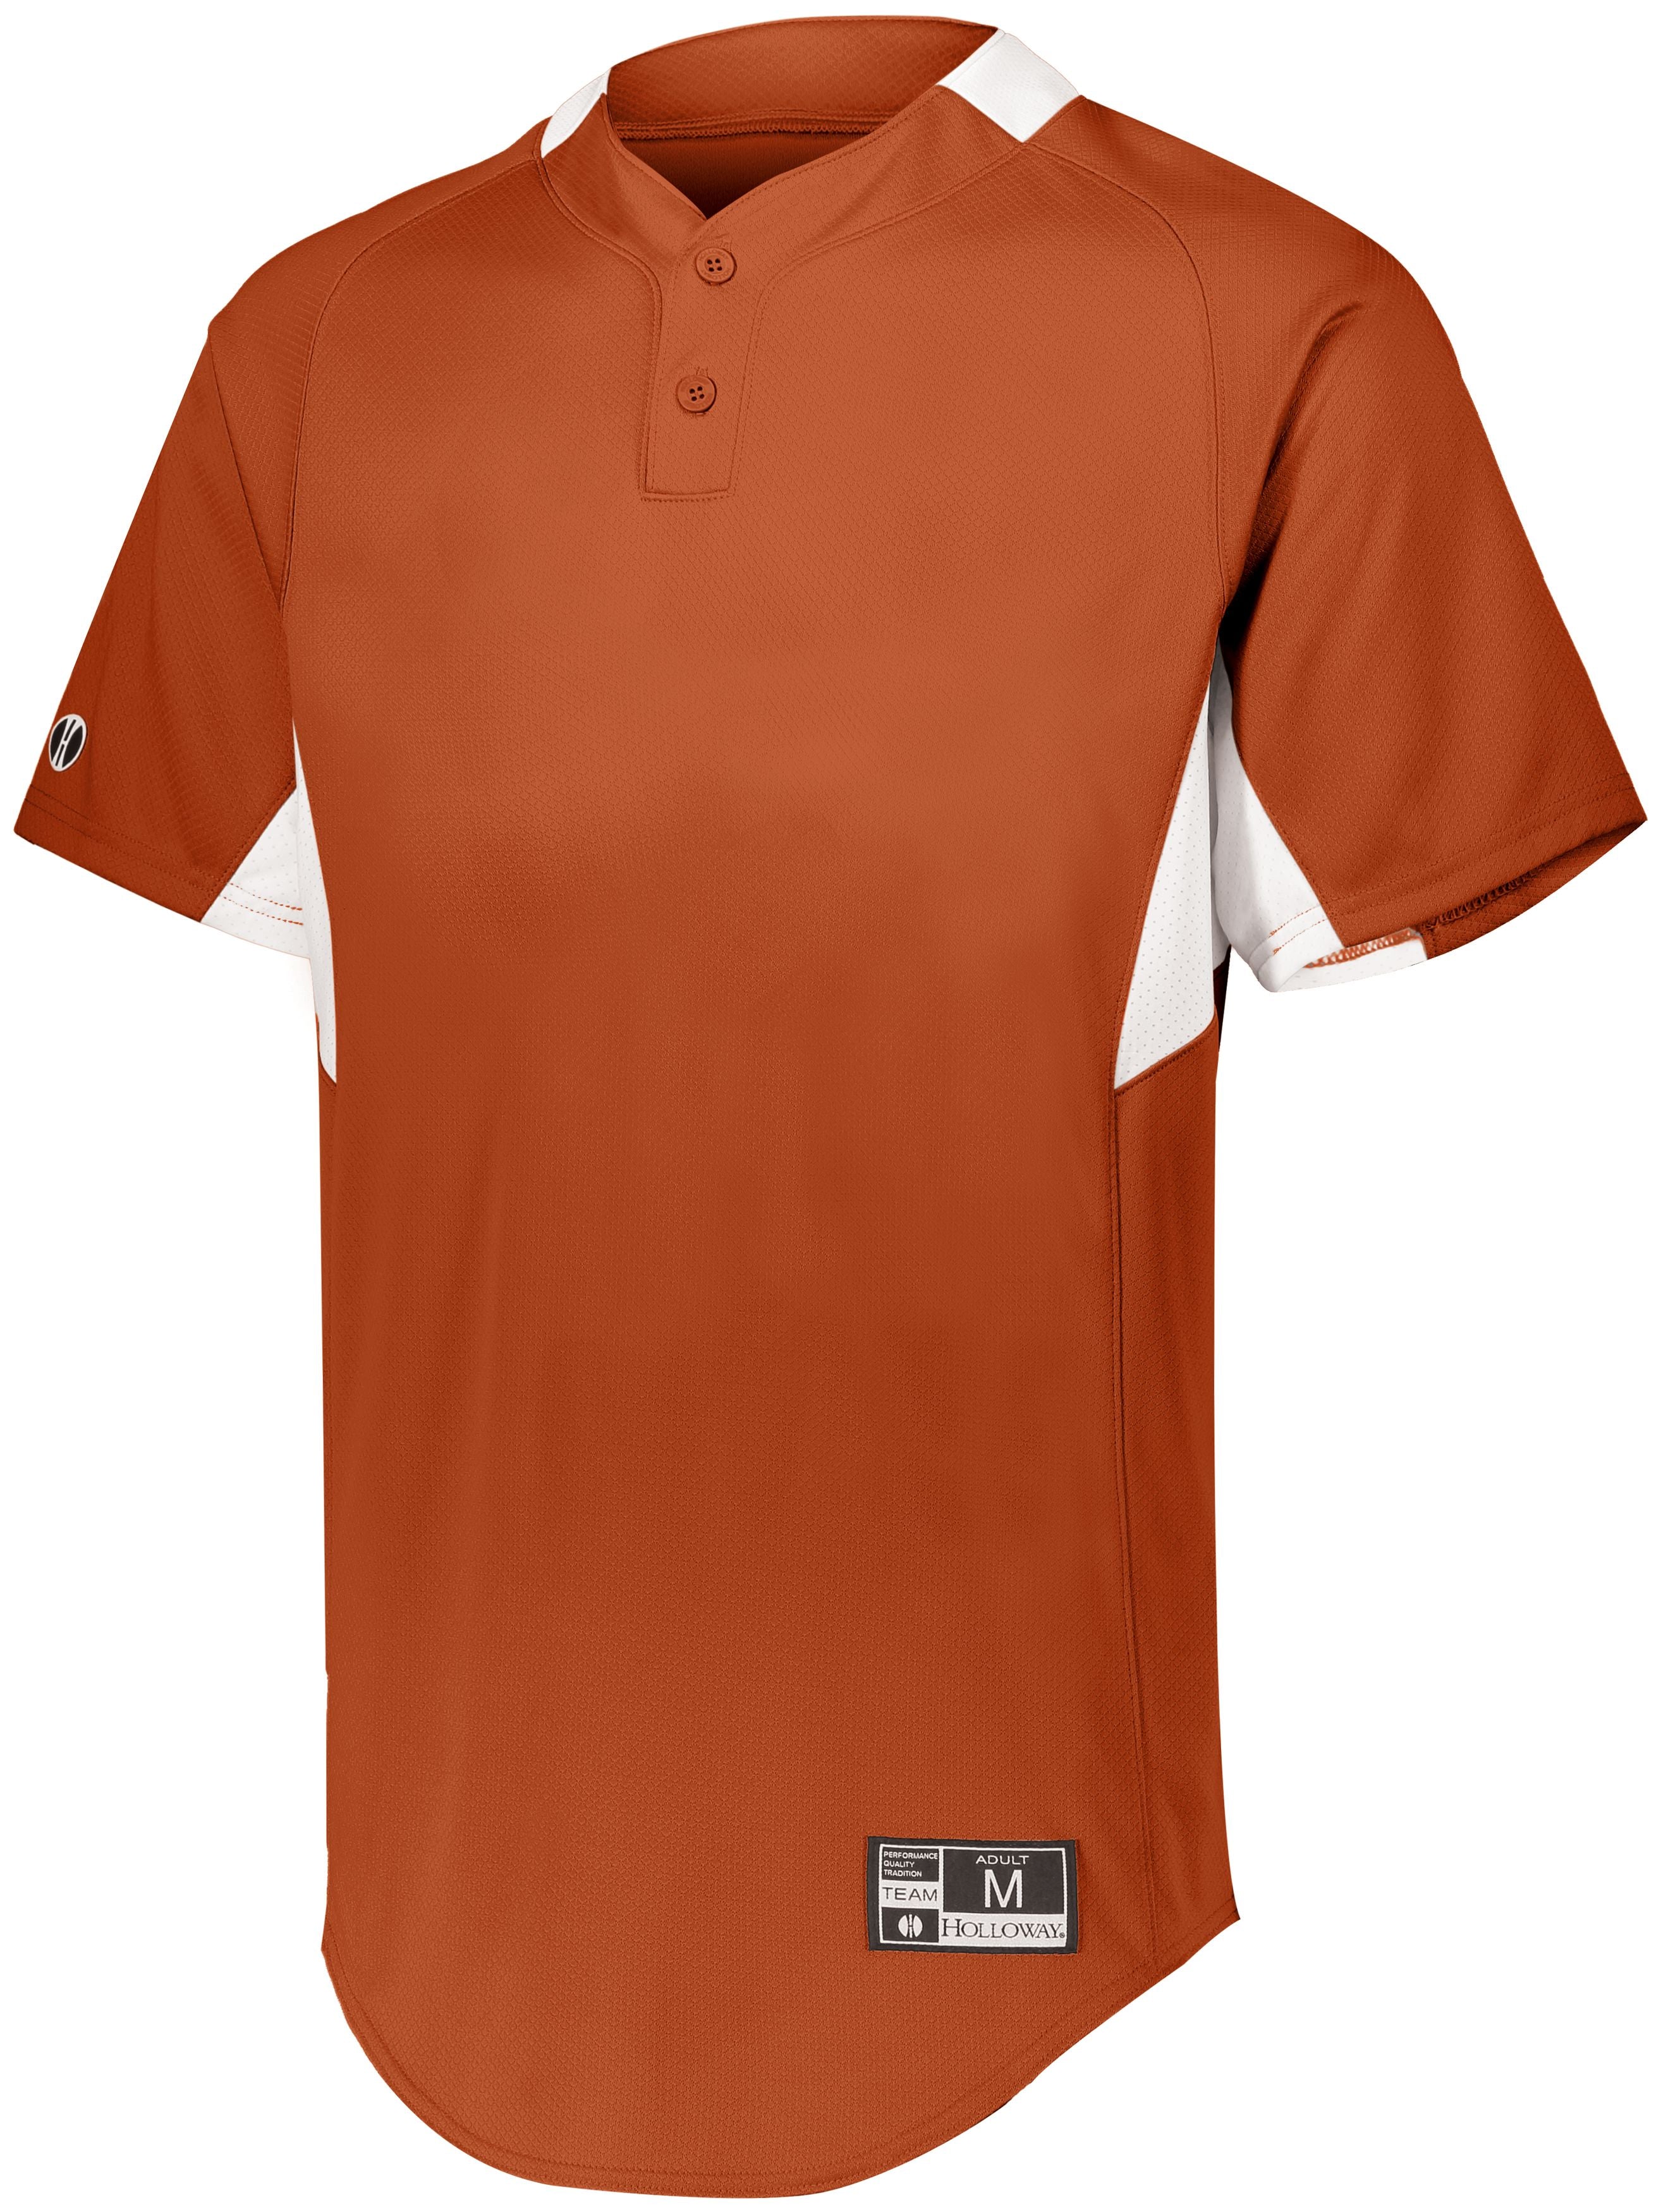 Holloway Youth  Game7 Two-Button Baseball Jersey in Orange/White  -Part of the Youth, Youth-Jersey, Baseball, Holloway, Shirts, All-Sports, All-Sports-1 product lines at KanaleyCreations.com